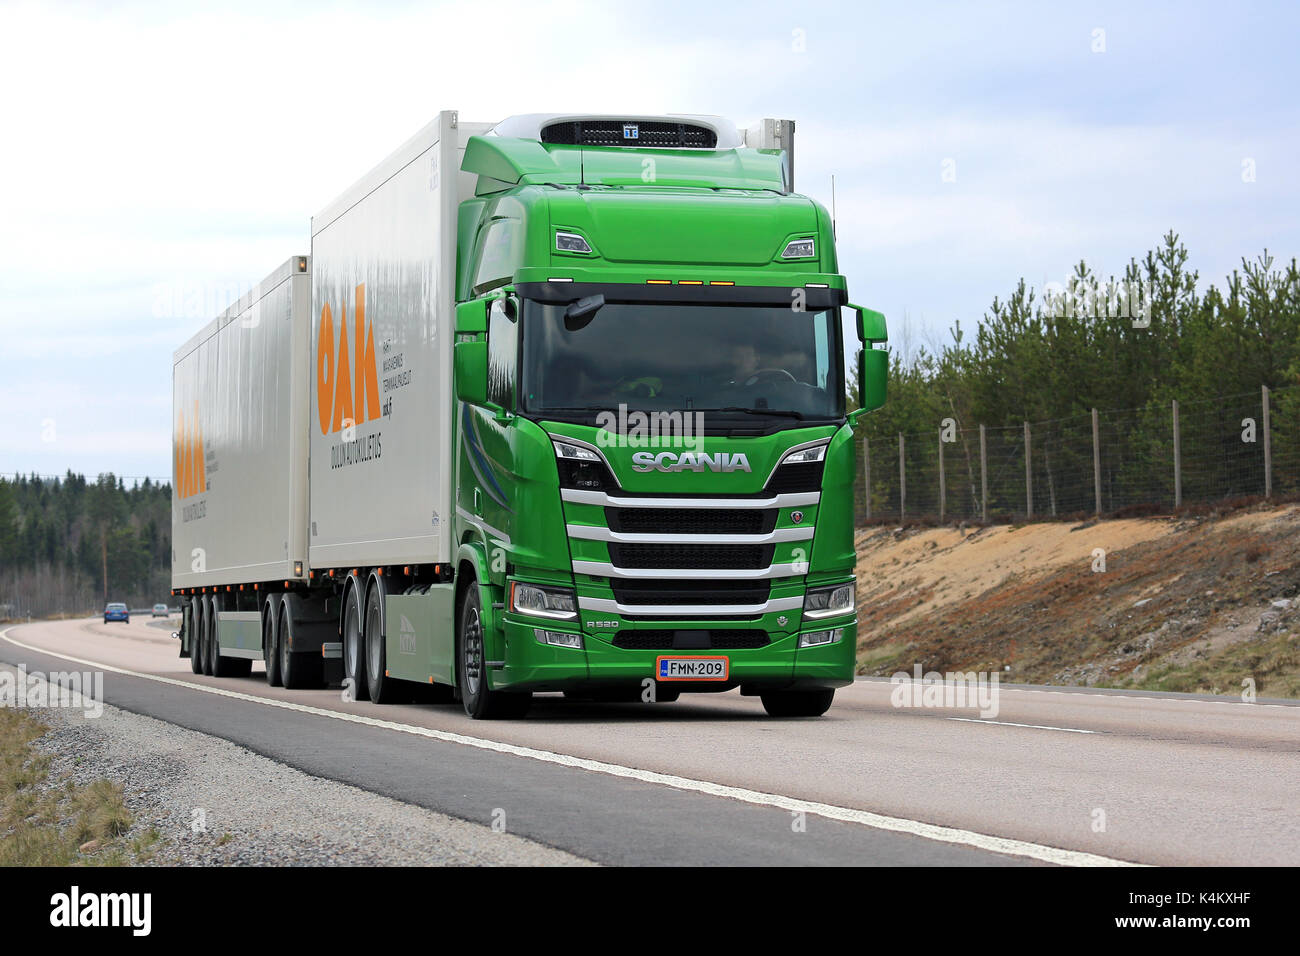 VAAJAKOSKI, FINLAND - MAY 19, 2017: Green Next Generation Scania R580 refrigerated trailer combination of Oulun Autokuljetus Oy hauls goods along high Stock Photo